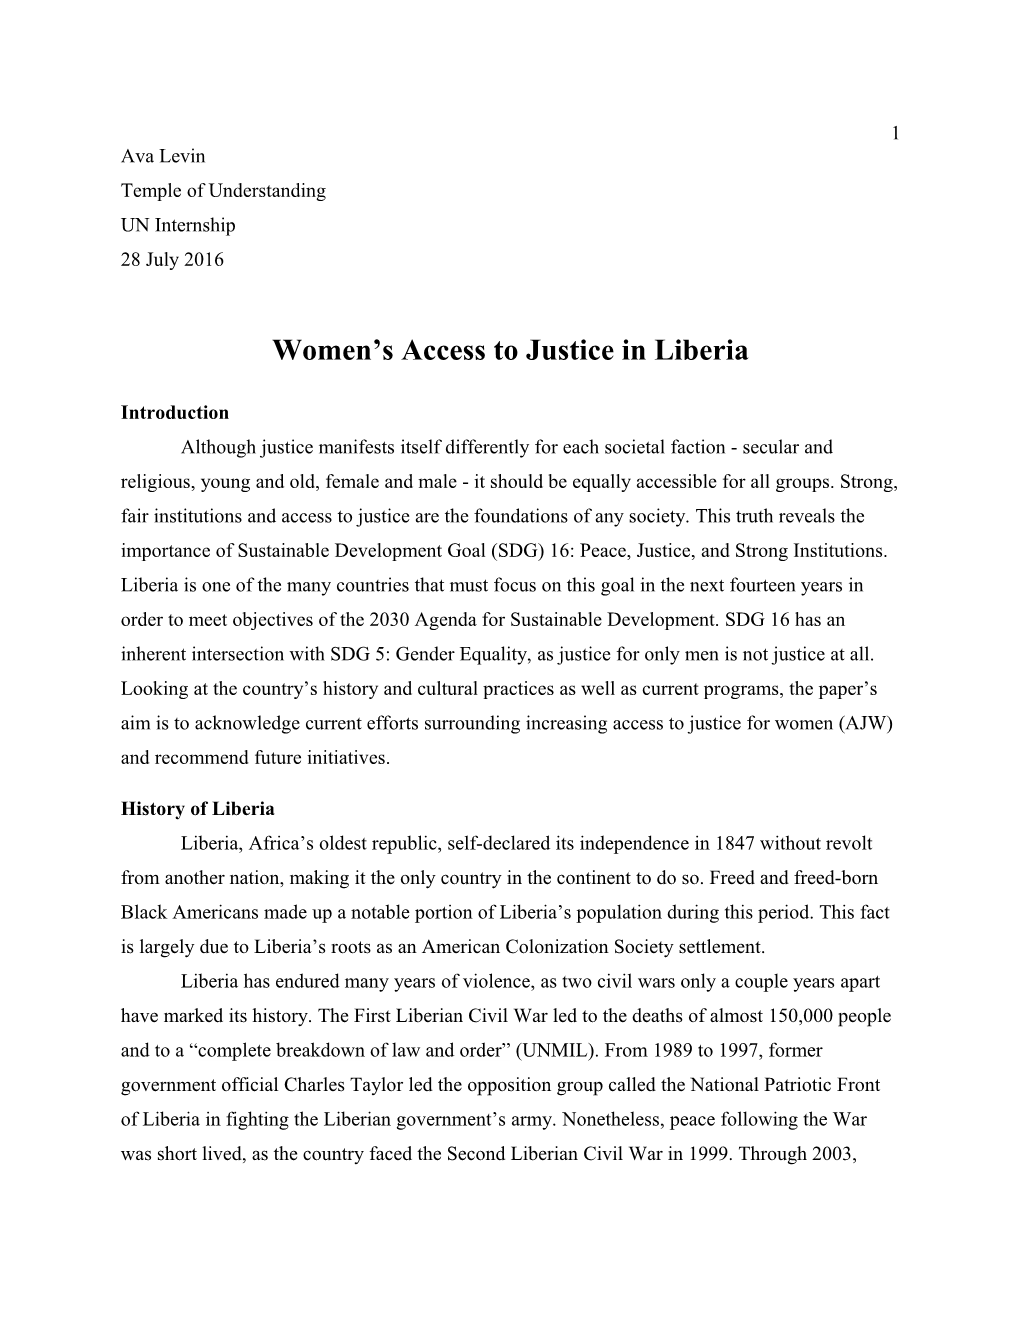 Women S Access to Justice in Liberia